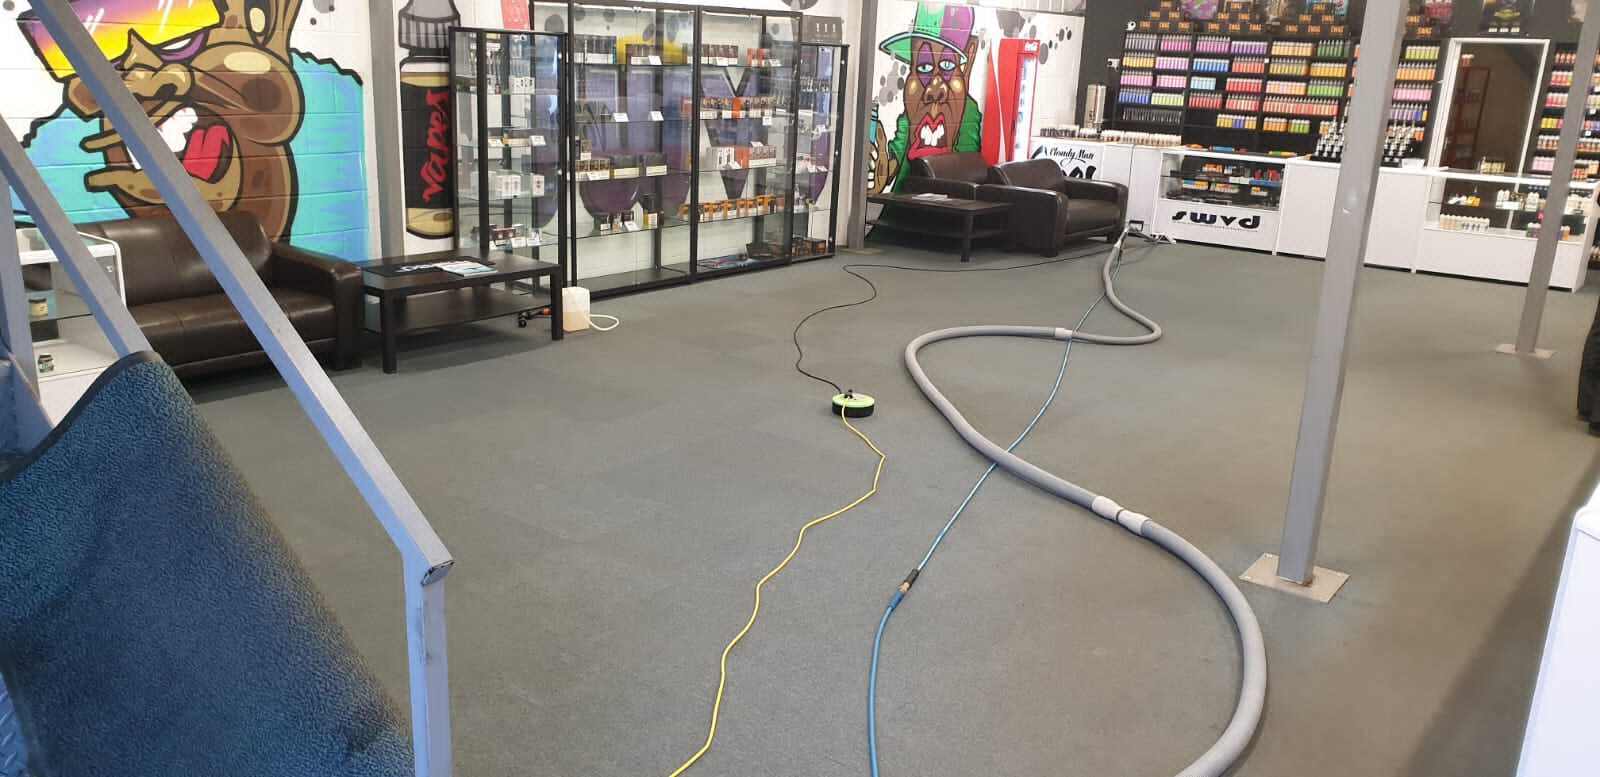 Carpet being cleaned in a shop